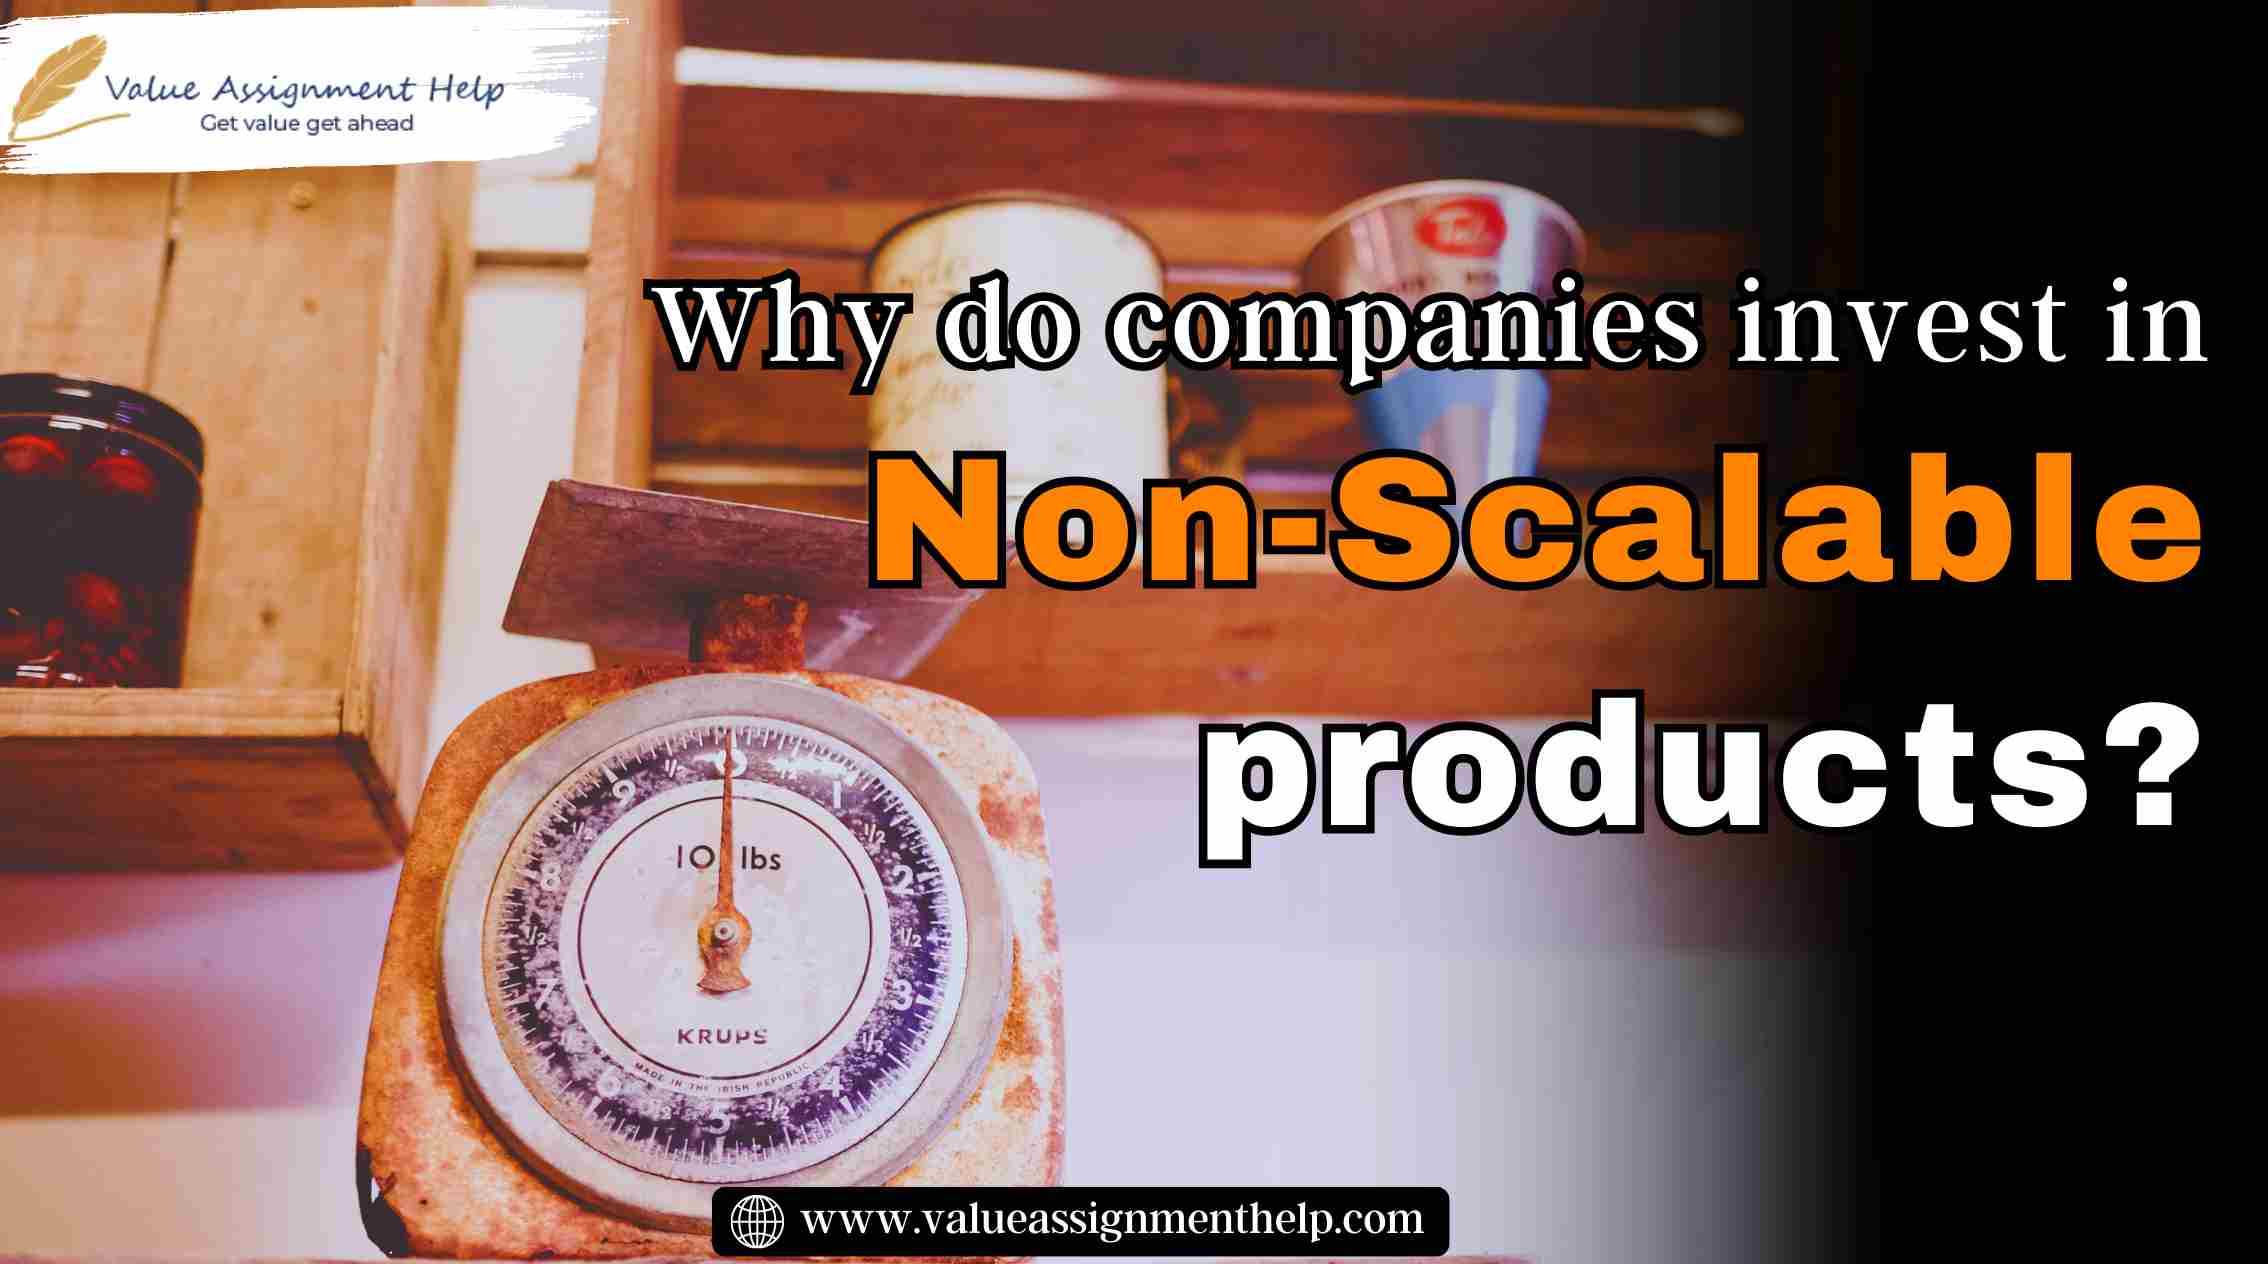  Why do companies invest in non-scalable products?